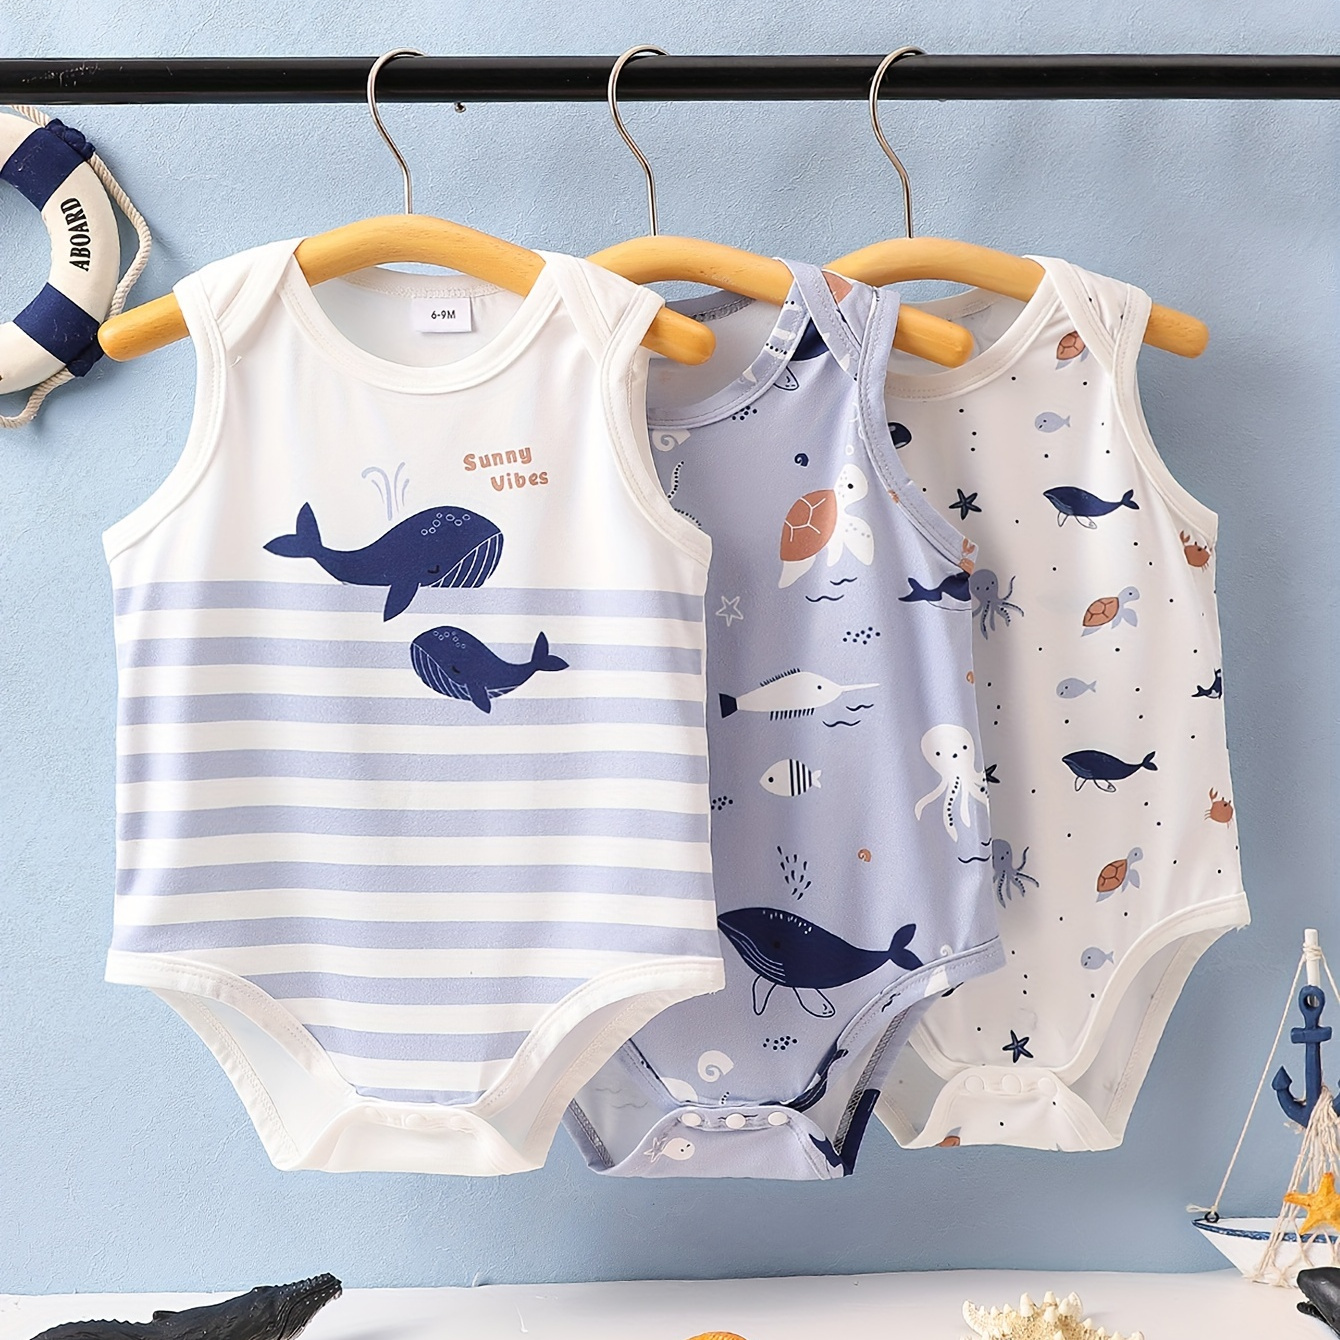 

3pcs Newborn Boys Cute Cartoon Dolphin Print Bodysuits, Soft Baby Boy Rompers, Triangular One-piece Outfits, Adorable Style